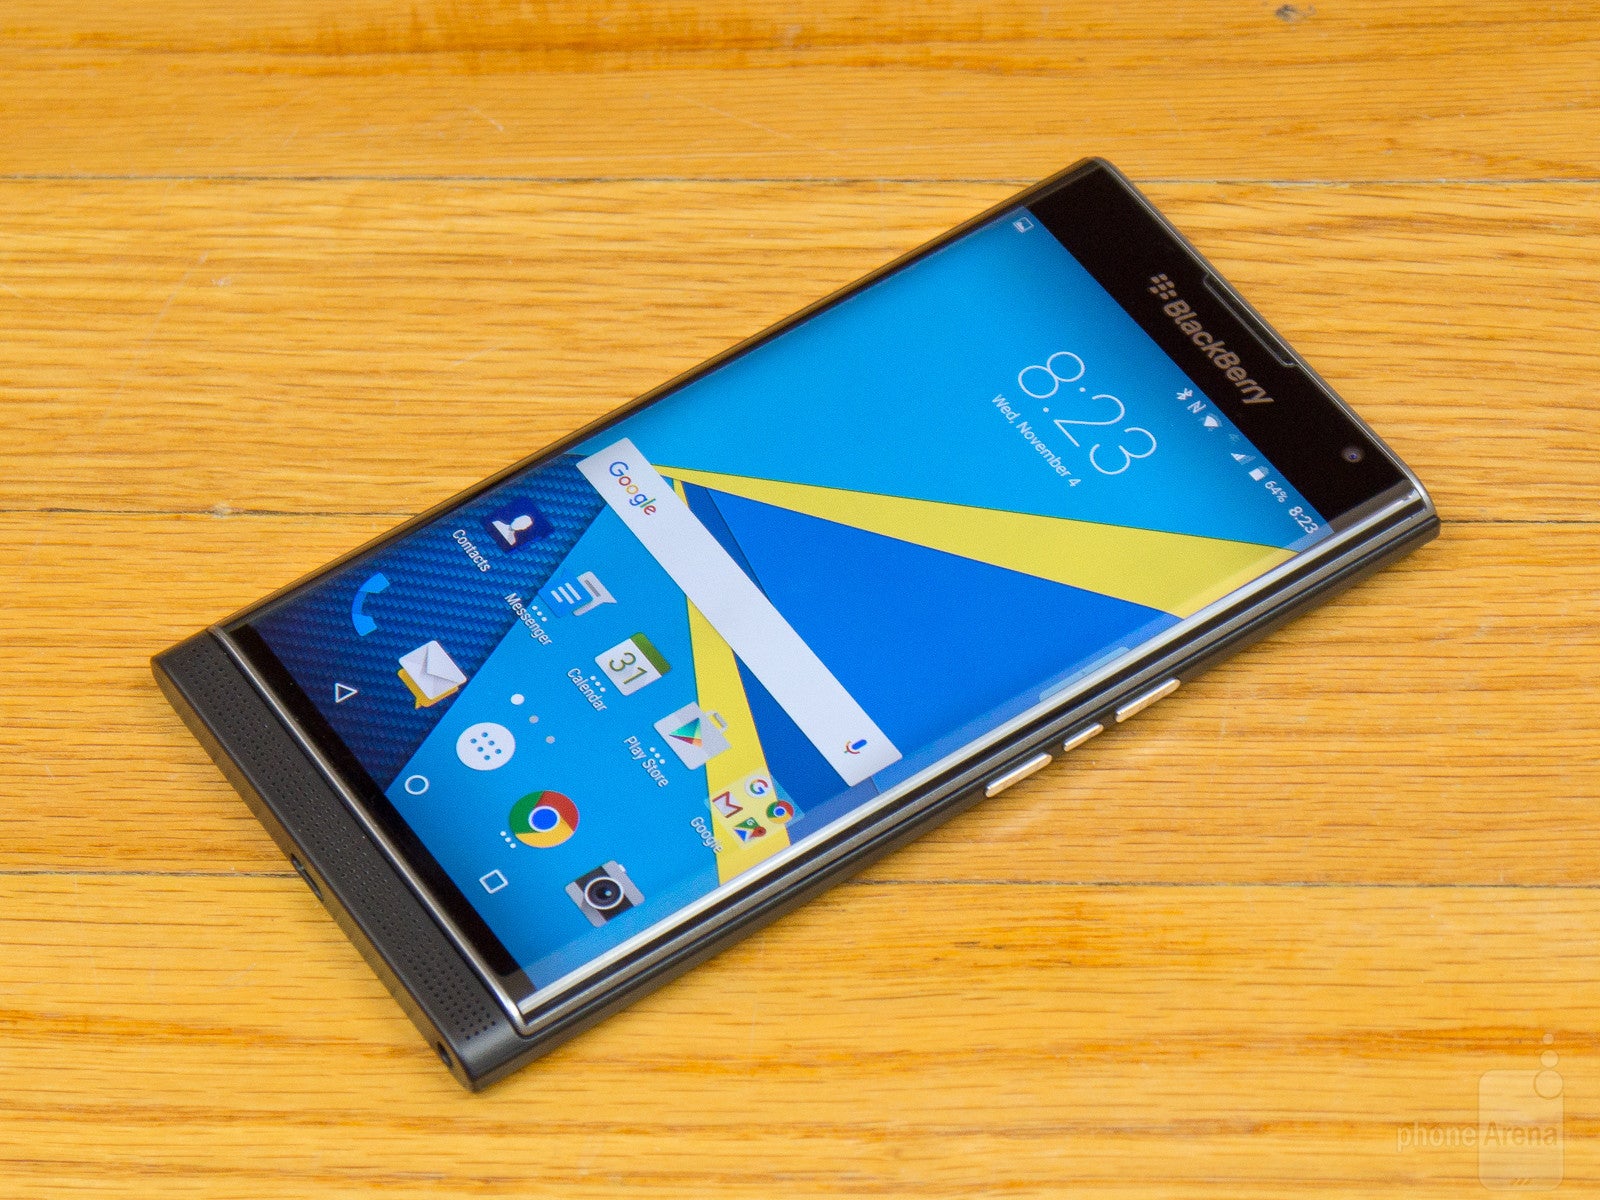 This deal here allows you to get a BlackBerry PRIV for $299.99, save more than 25%